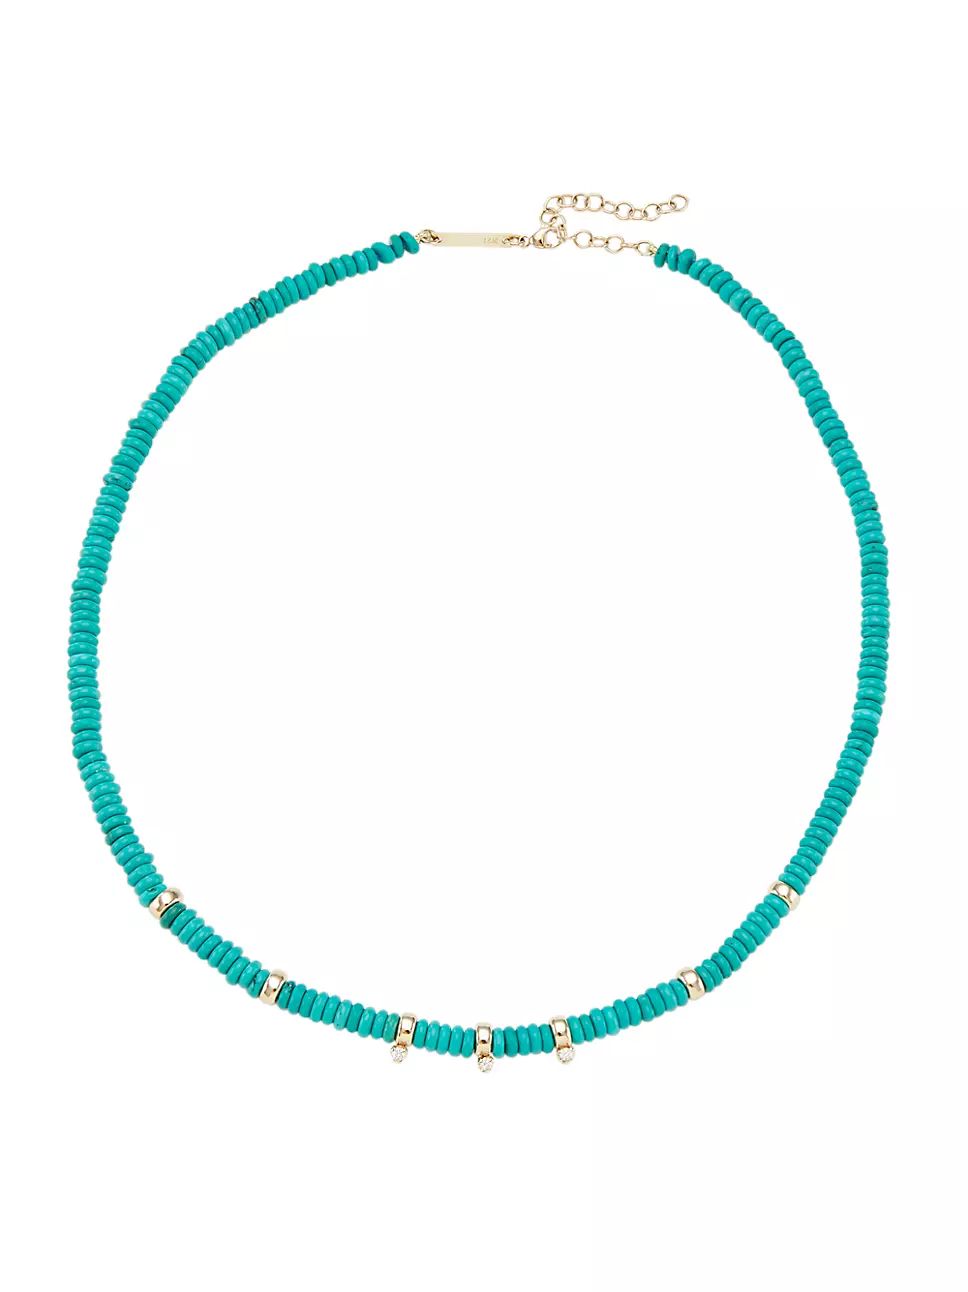 Zoë Chicco 14K Yellow Gold, Turquoise, &amp; Diamond Beaded Necklace | Saks Fifth Avenue